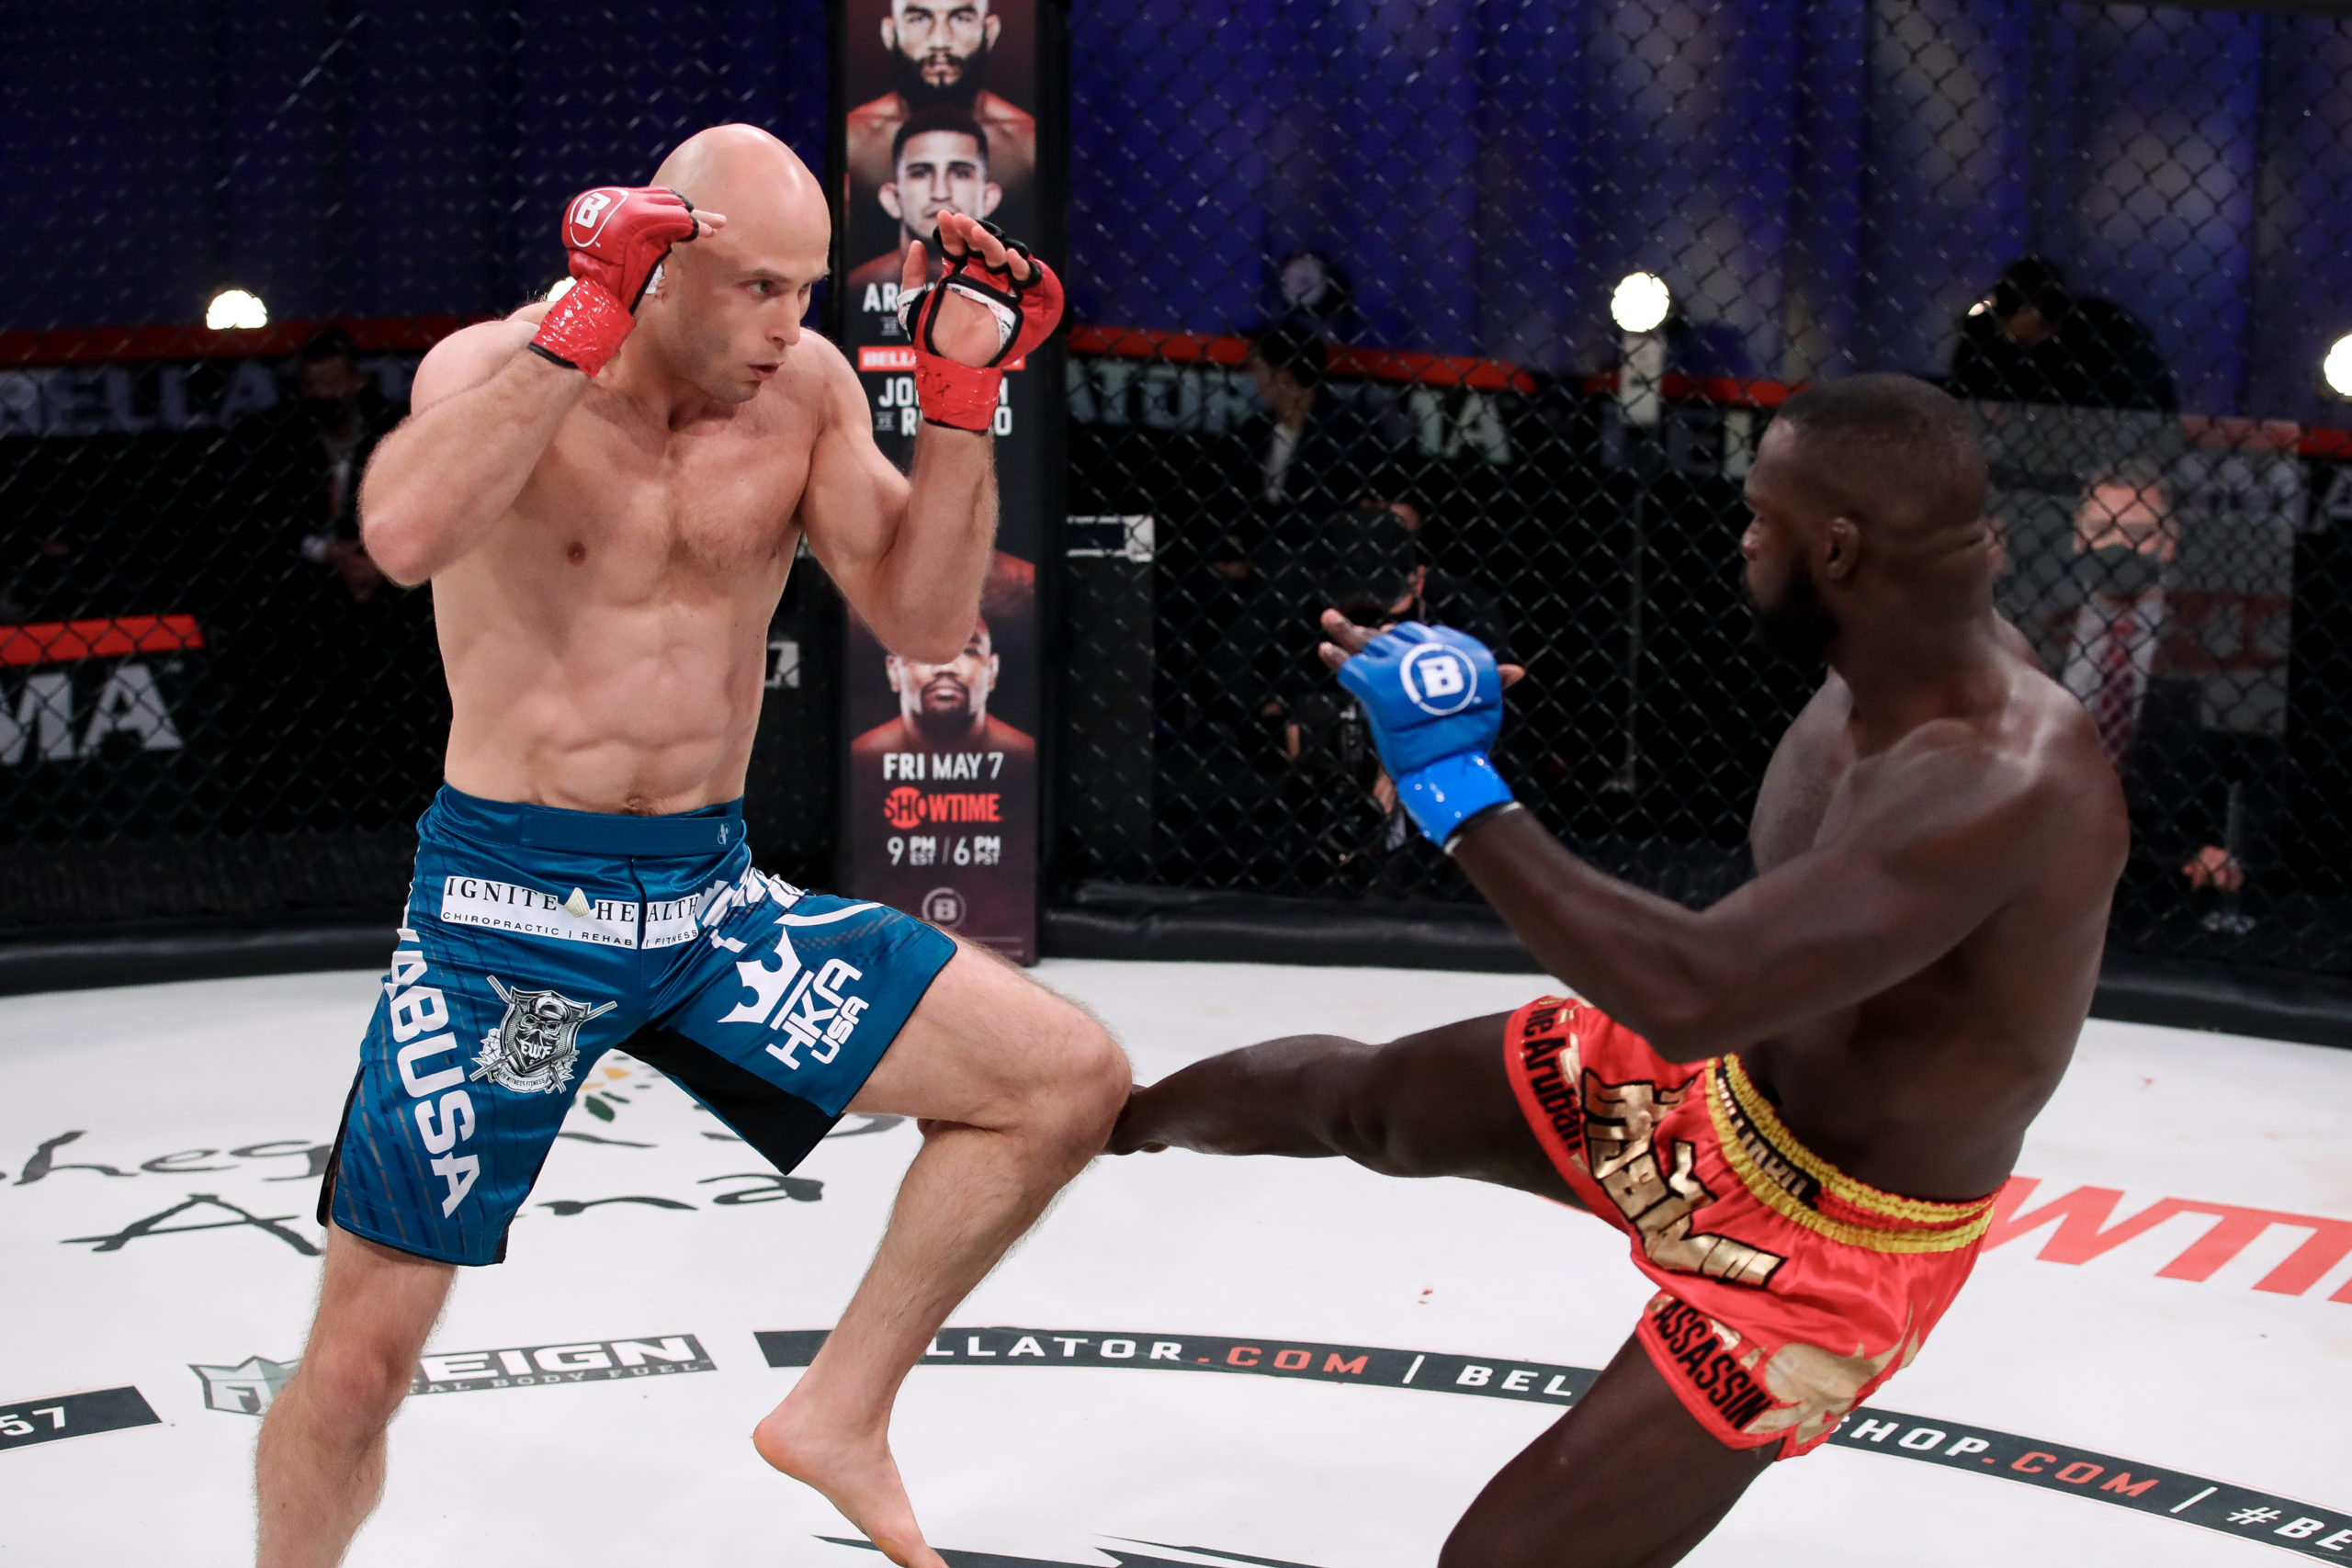 Julius Anglickas gets his armed raised in his most recently victory this past April over Gregory Millard at Bellator 257.